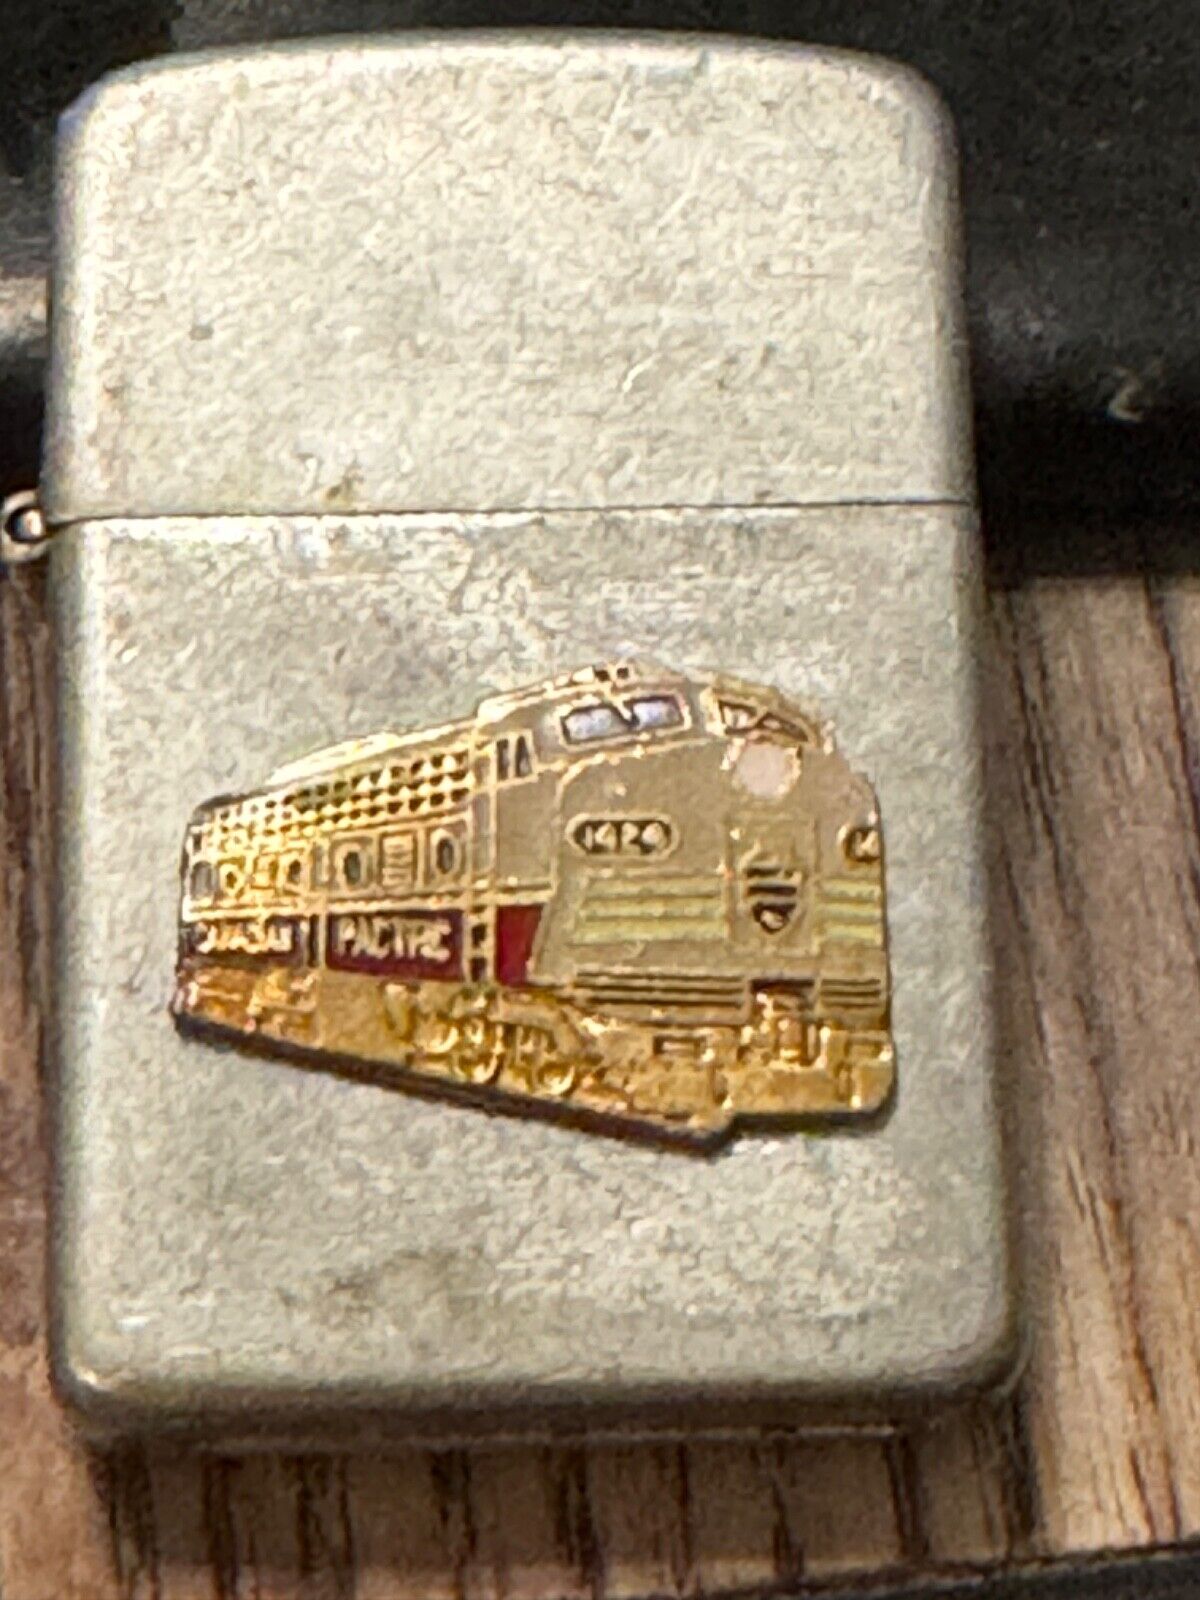 Lighter Canadian Pacific Railroad